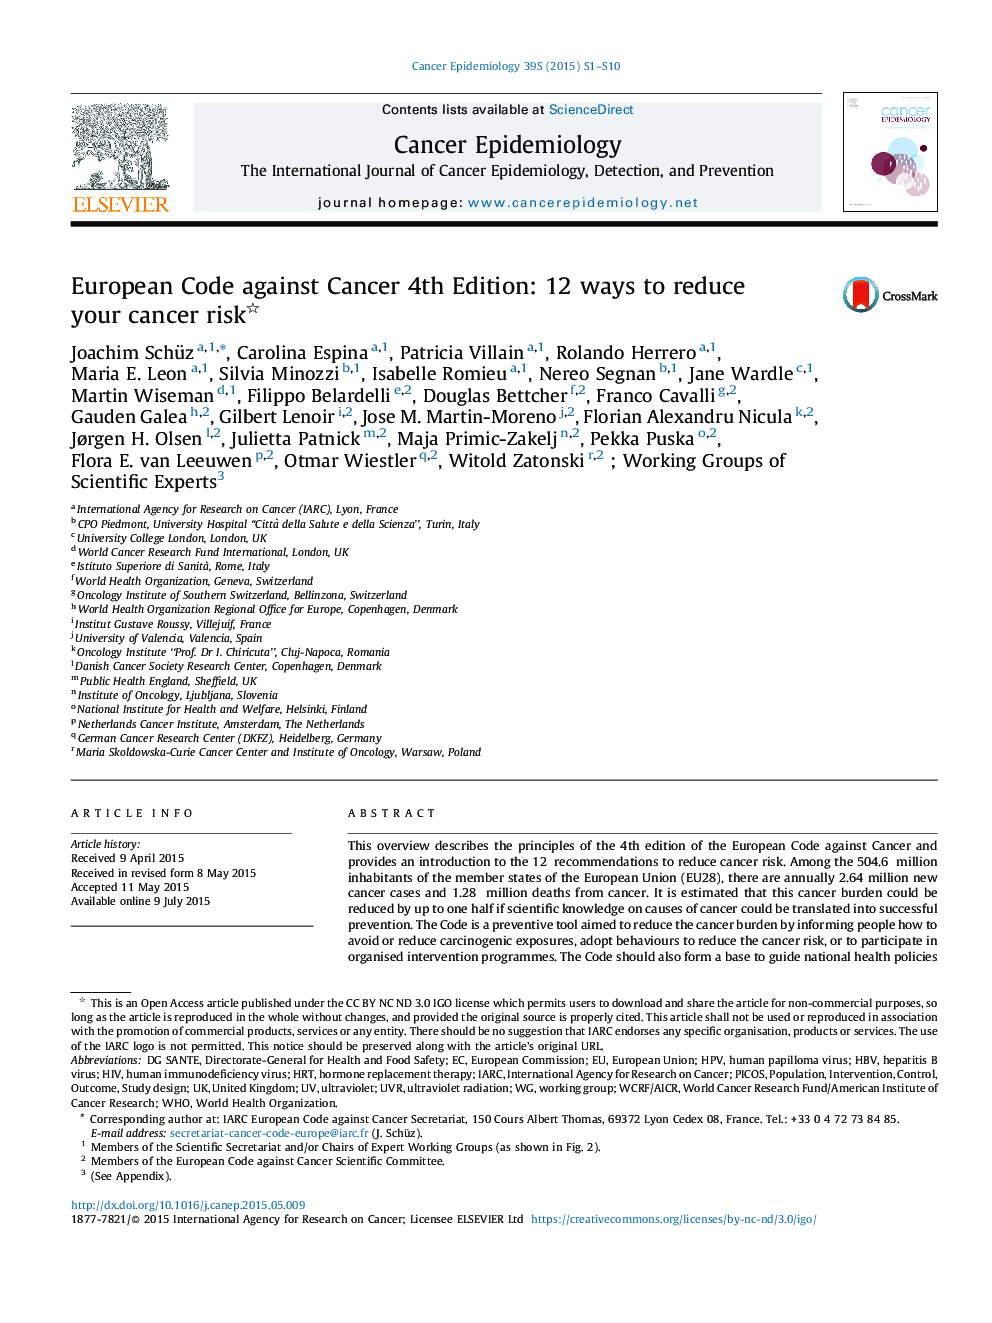 European Code against Cancer 4th Edition: 12 ways to reduce your cancer risk 